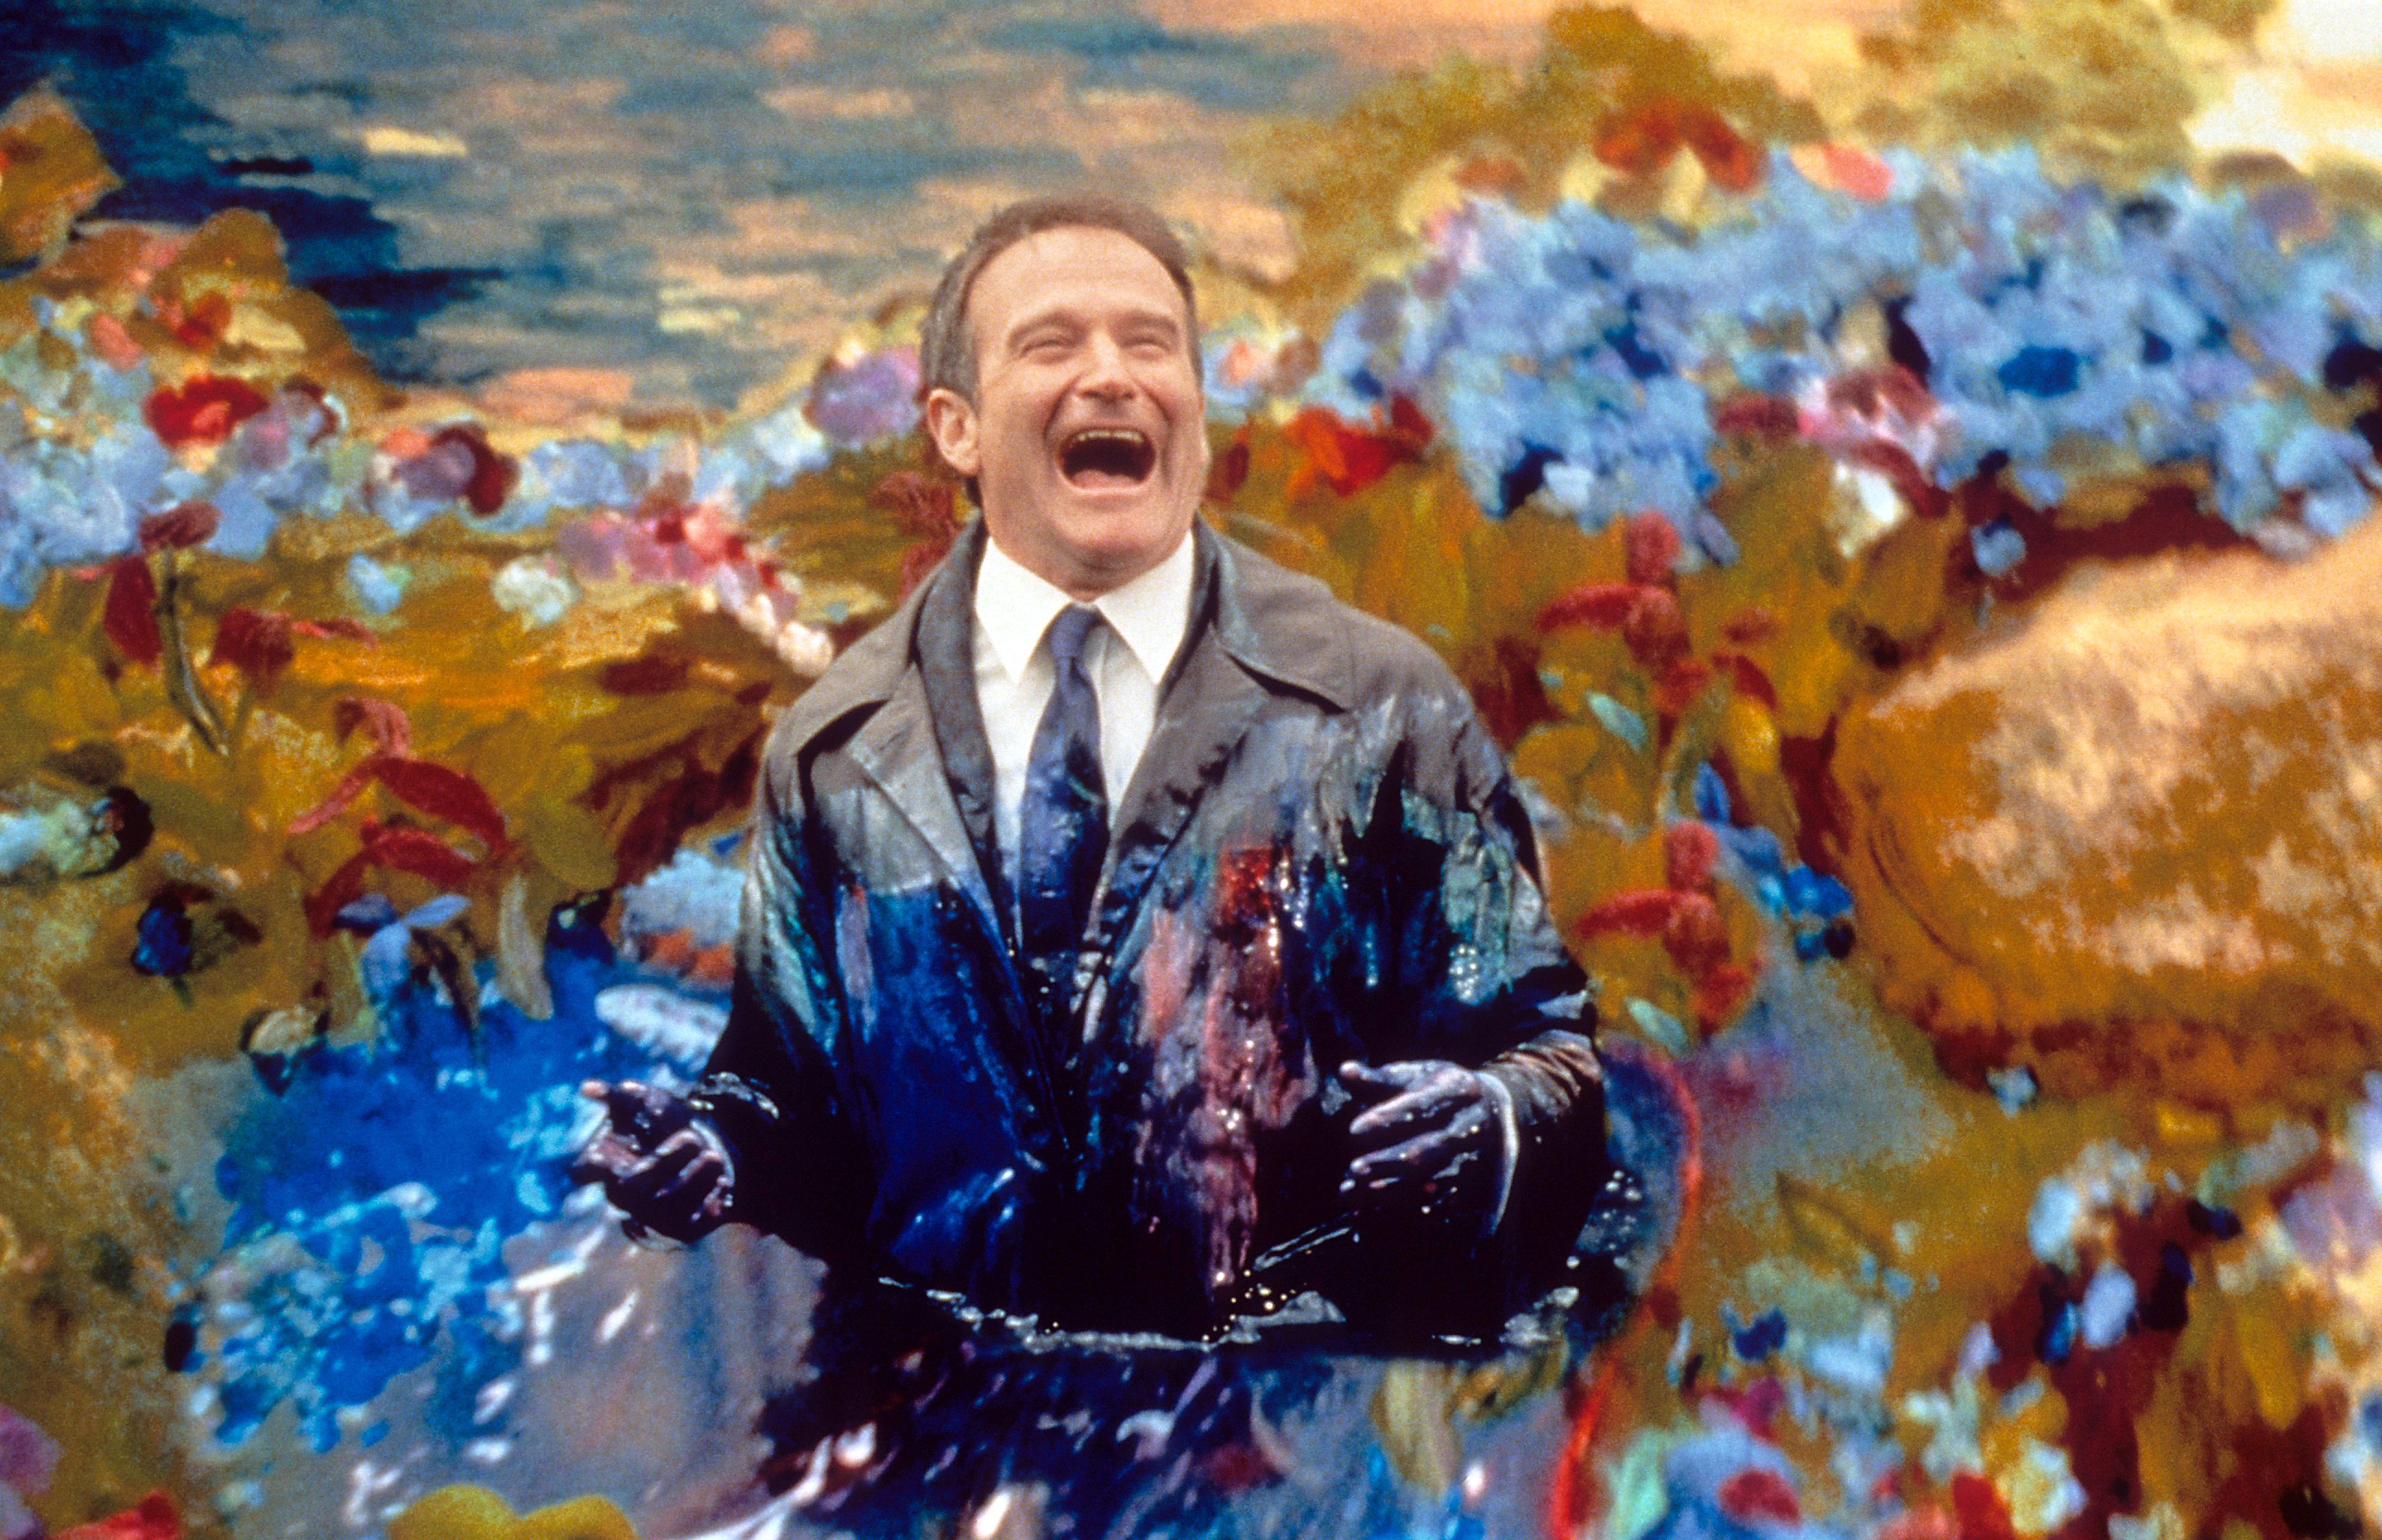 Robin Williams is covered in paint in a scene from the film 'What Dreams May Come', 1998. (Photo by Polygram Filmed Entertainment/Getty Images)